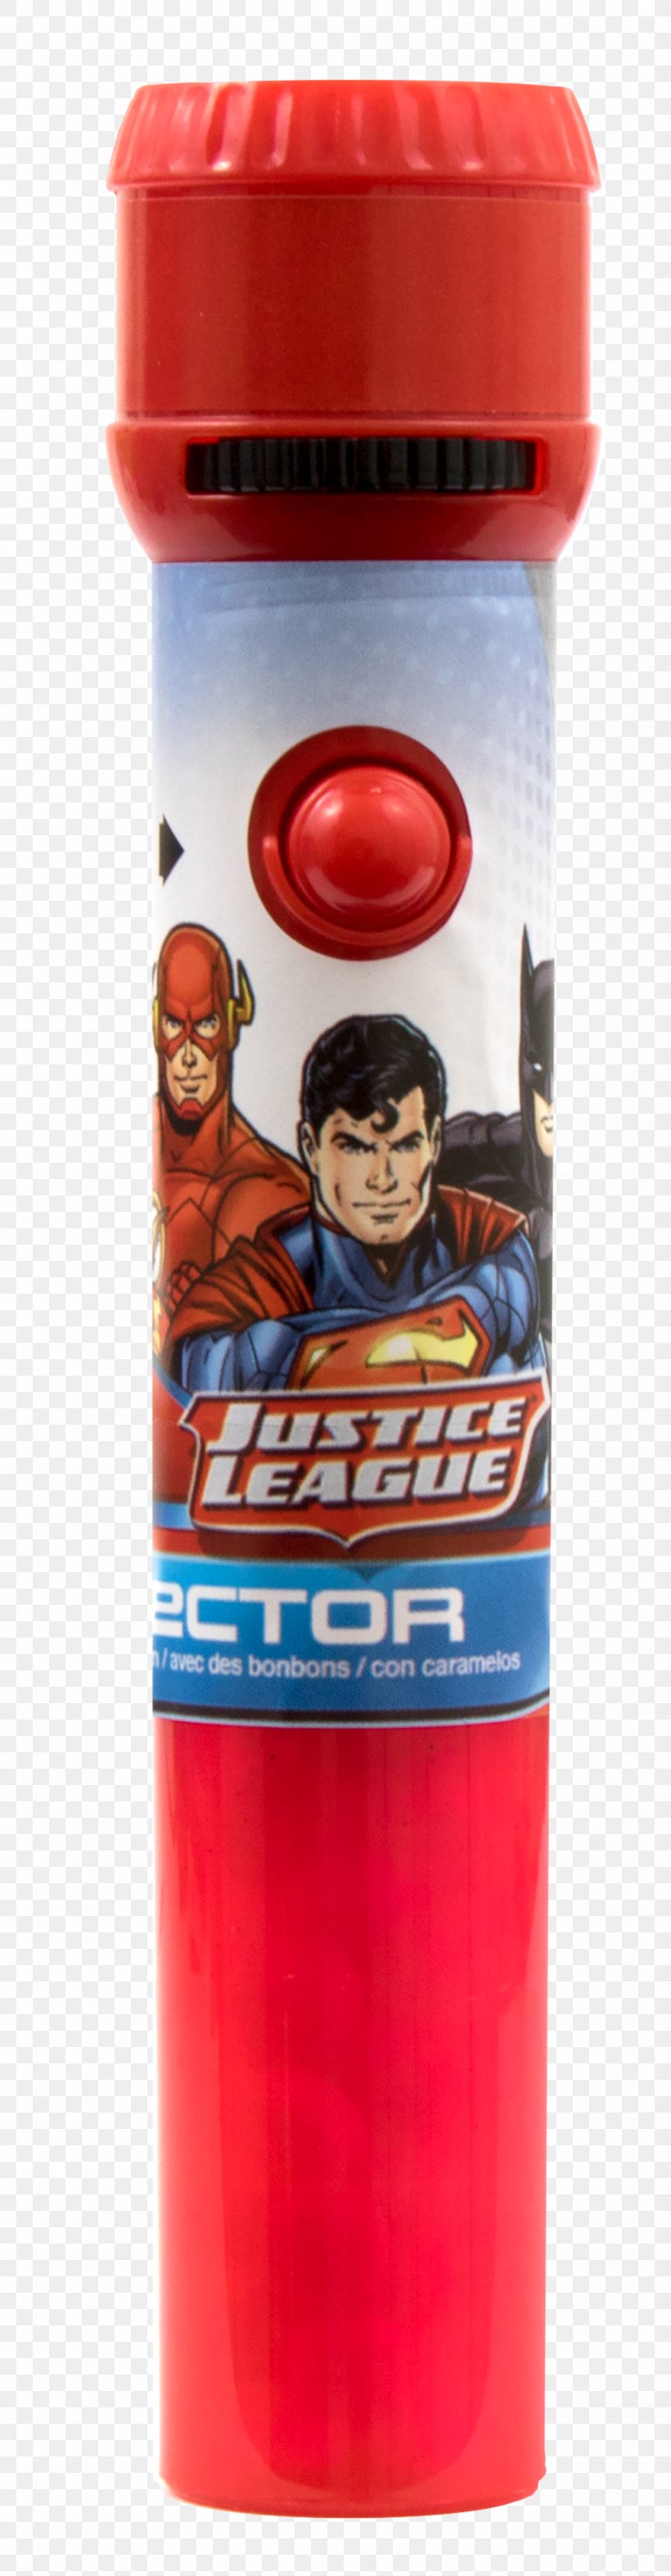 Justice League Projector BIP Holland B.V. Candy, PNG, 1029x3948px, Justice League, Banana, Bip Holland Bv, Bottle, Candy Download Free